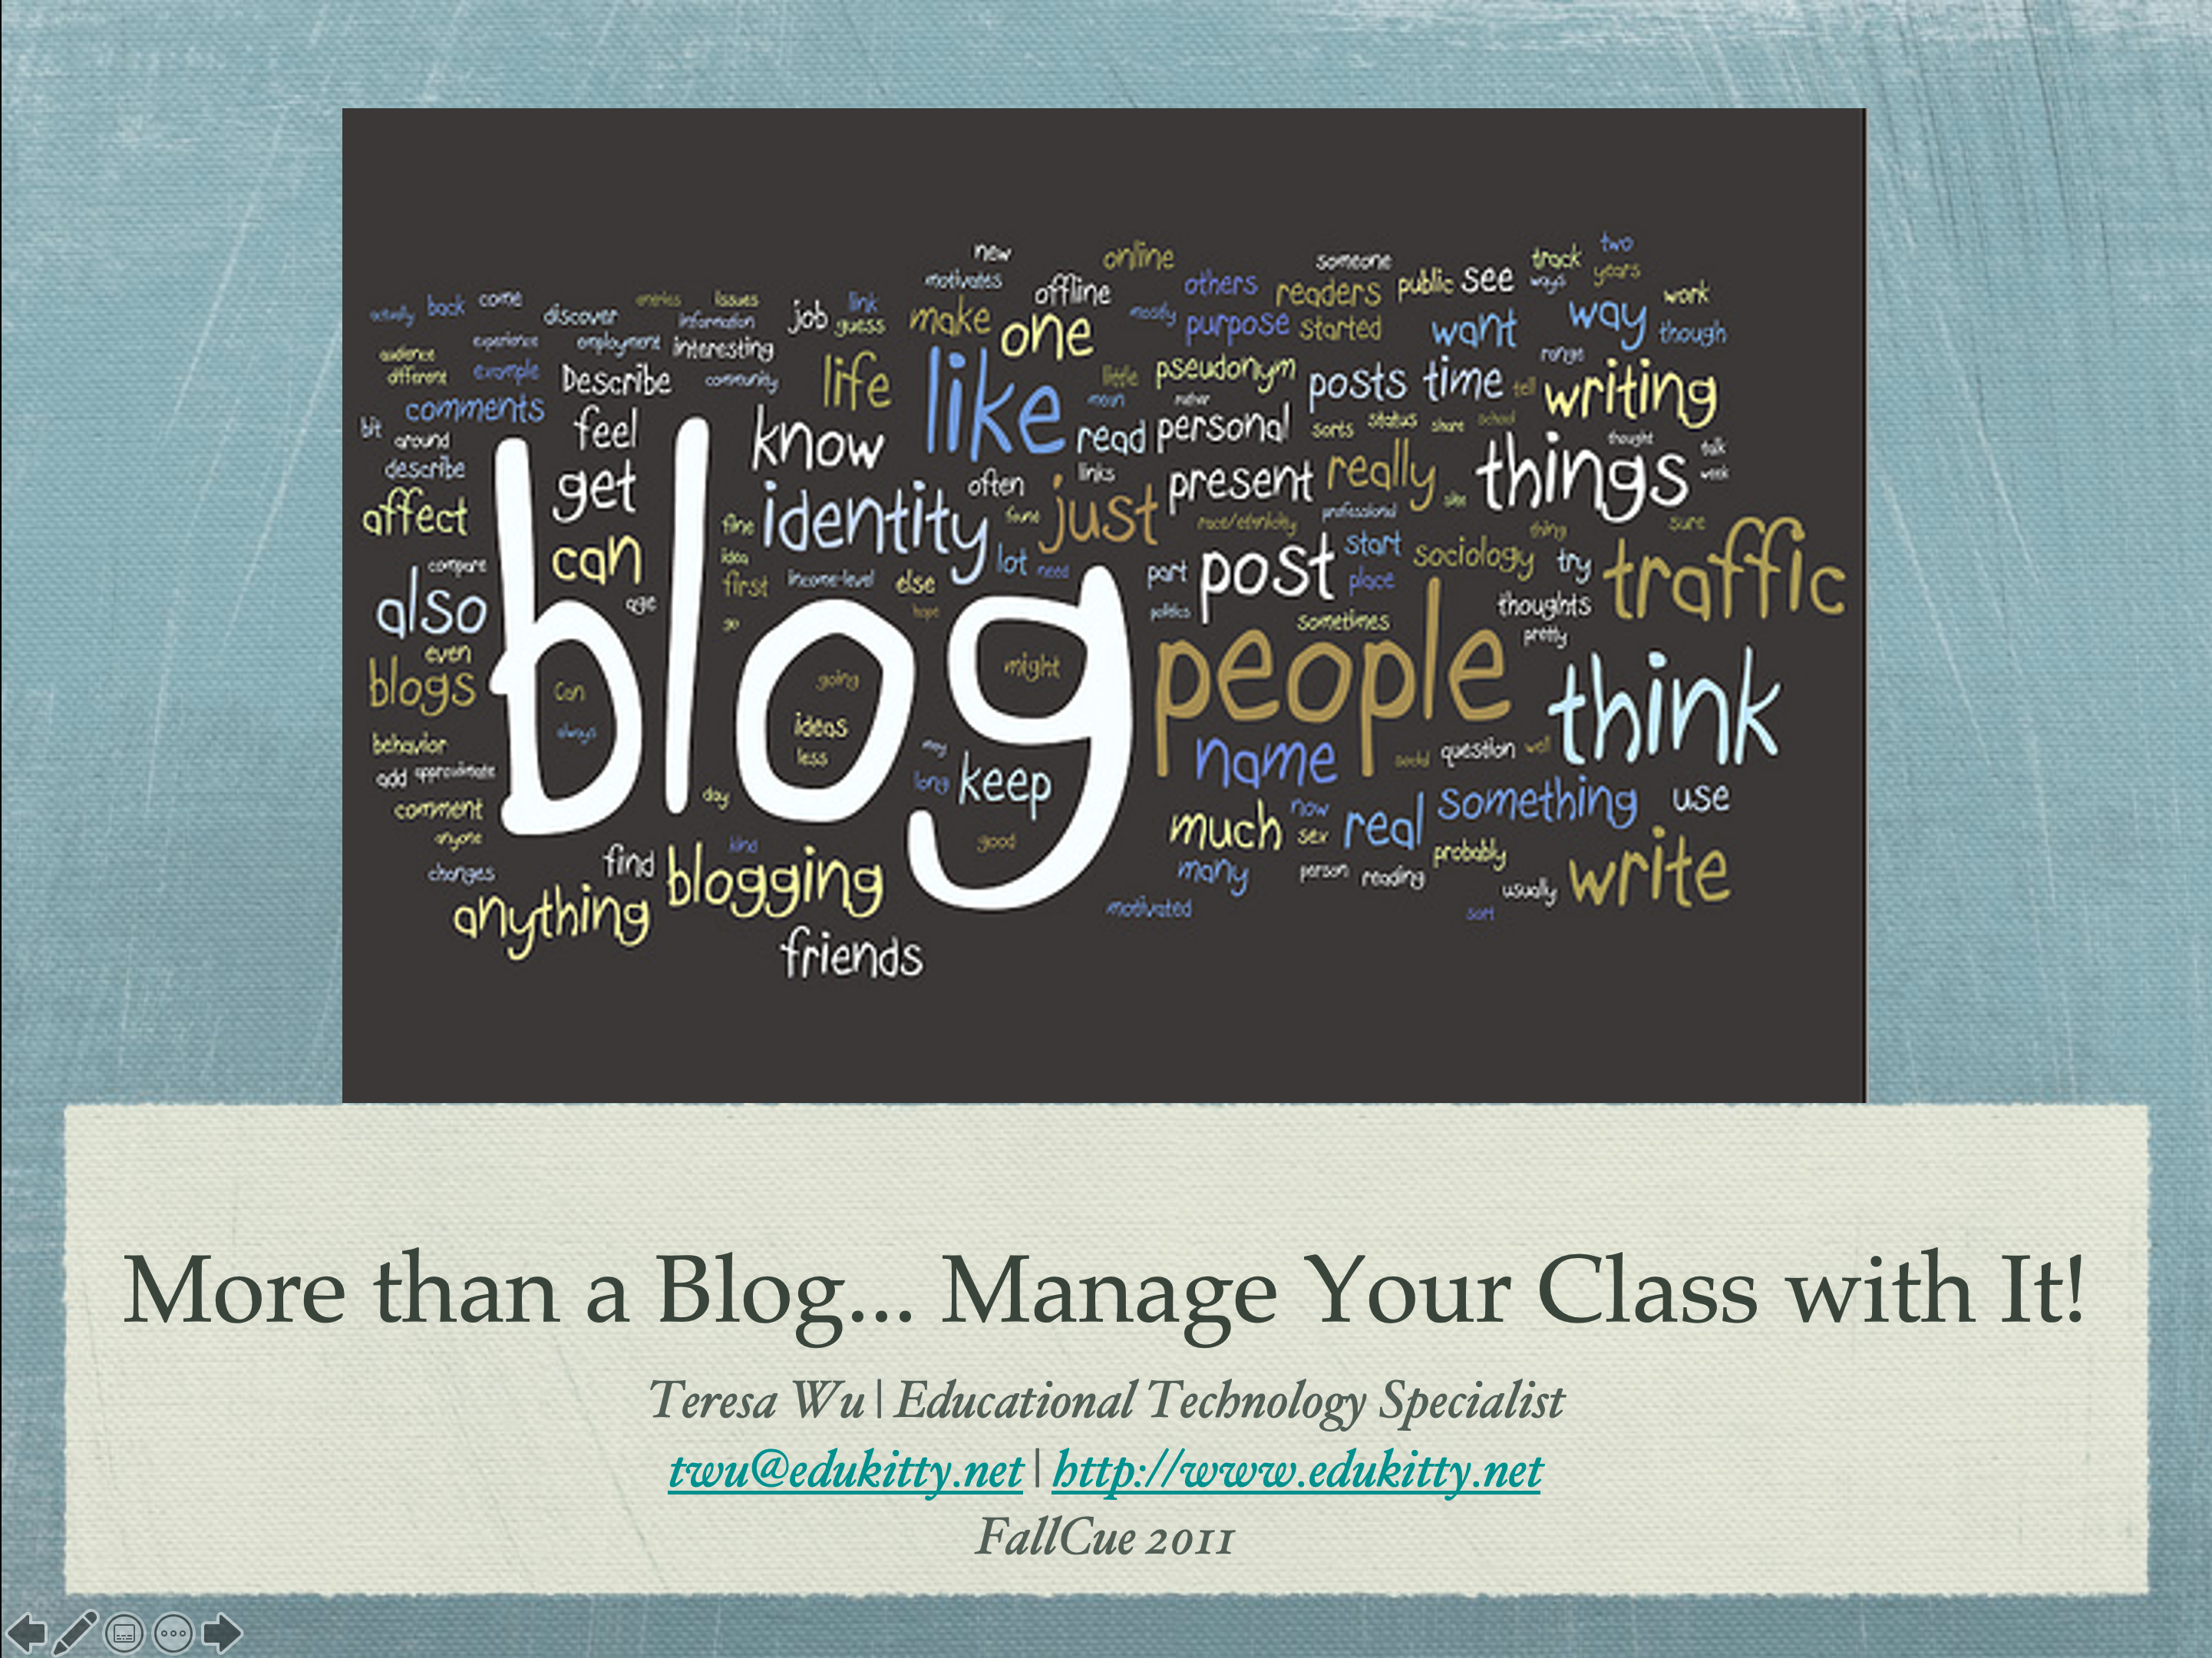 Fall CUE Presentation – “More Than a Blog… Manage Your Class with It!”